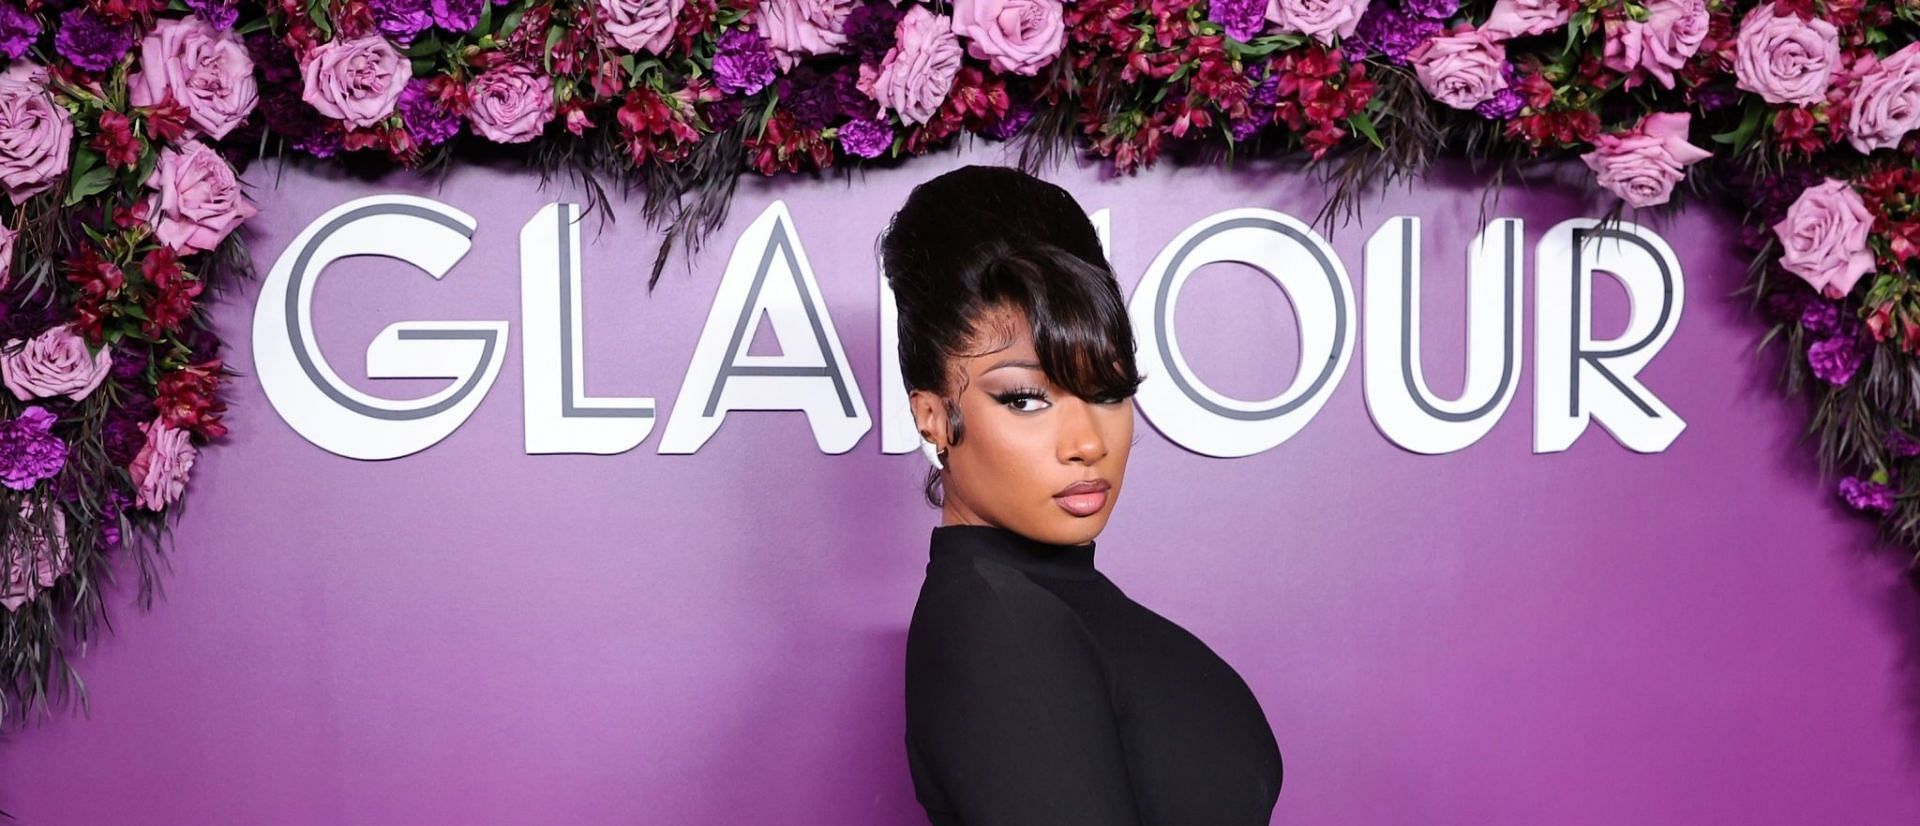 Megan Thee Stallion was allegedly shot on July 12, 2020 (Image via Theo Wargo/Getty Images)